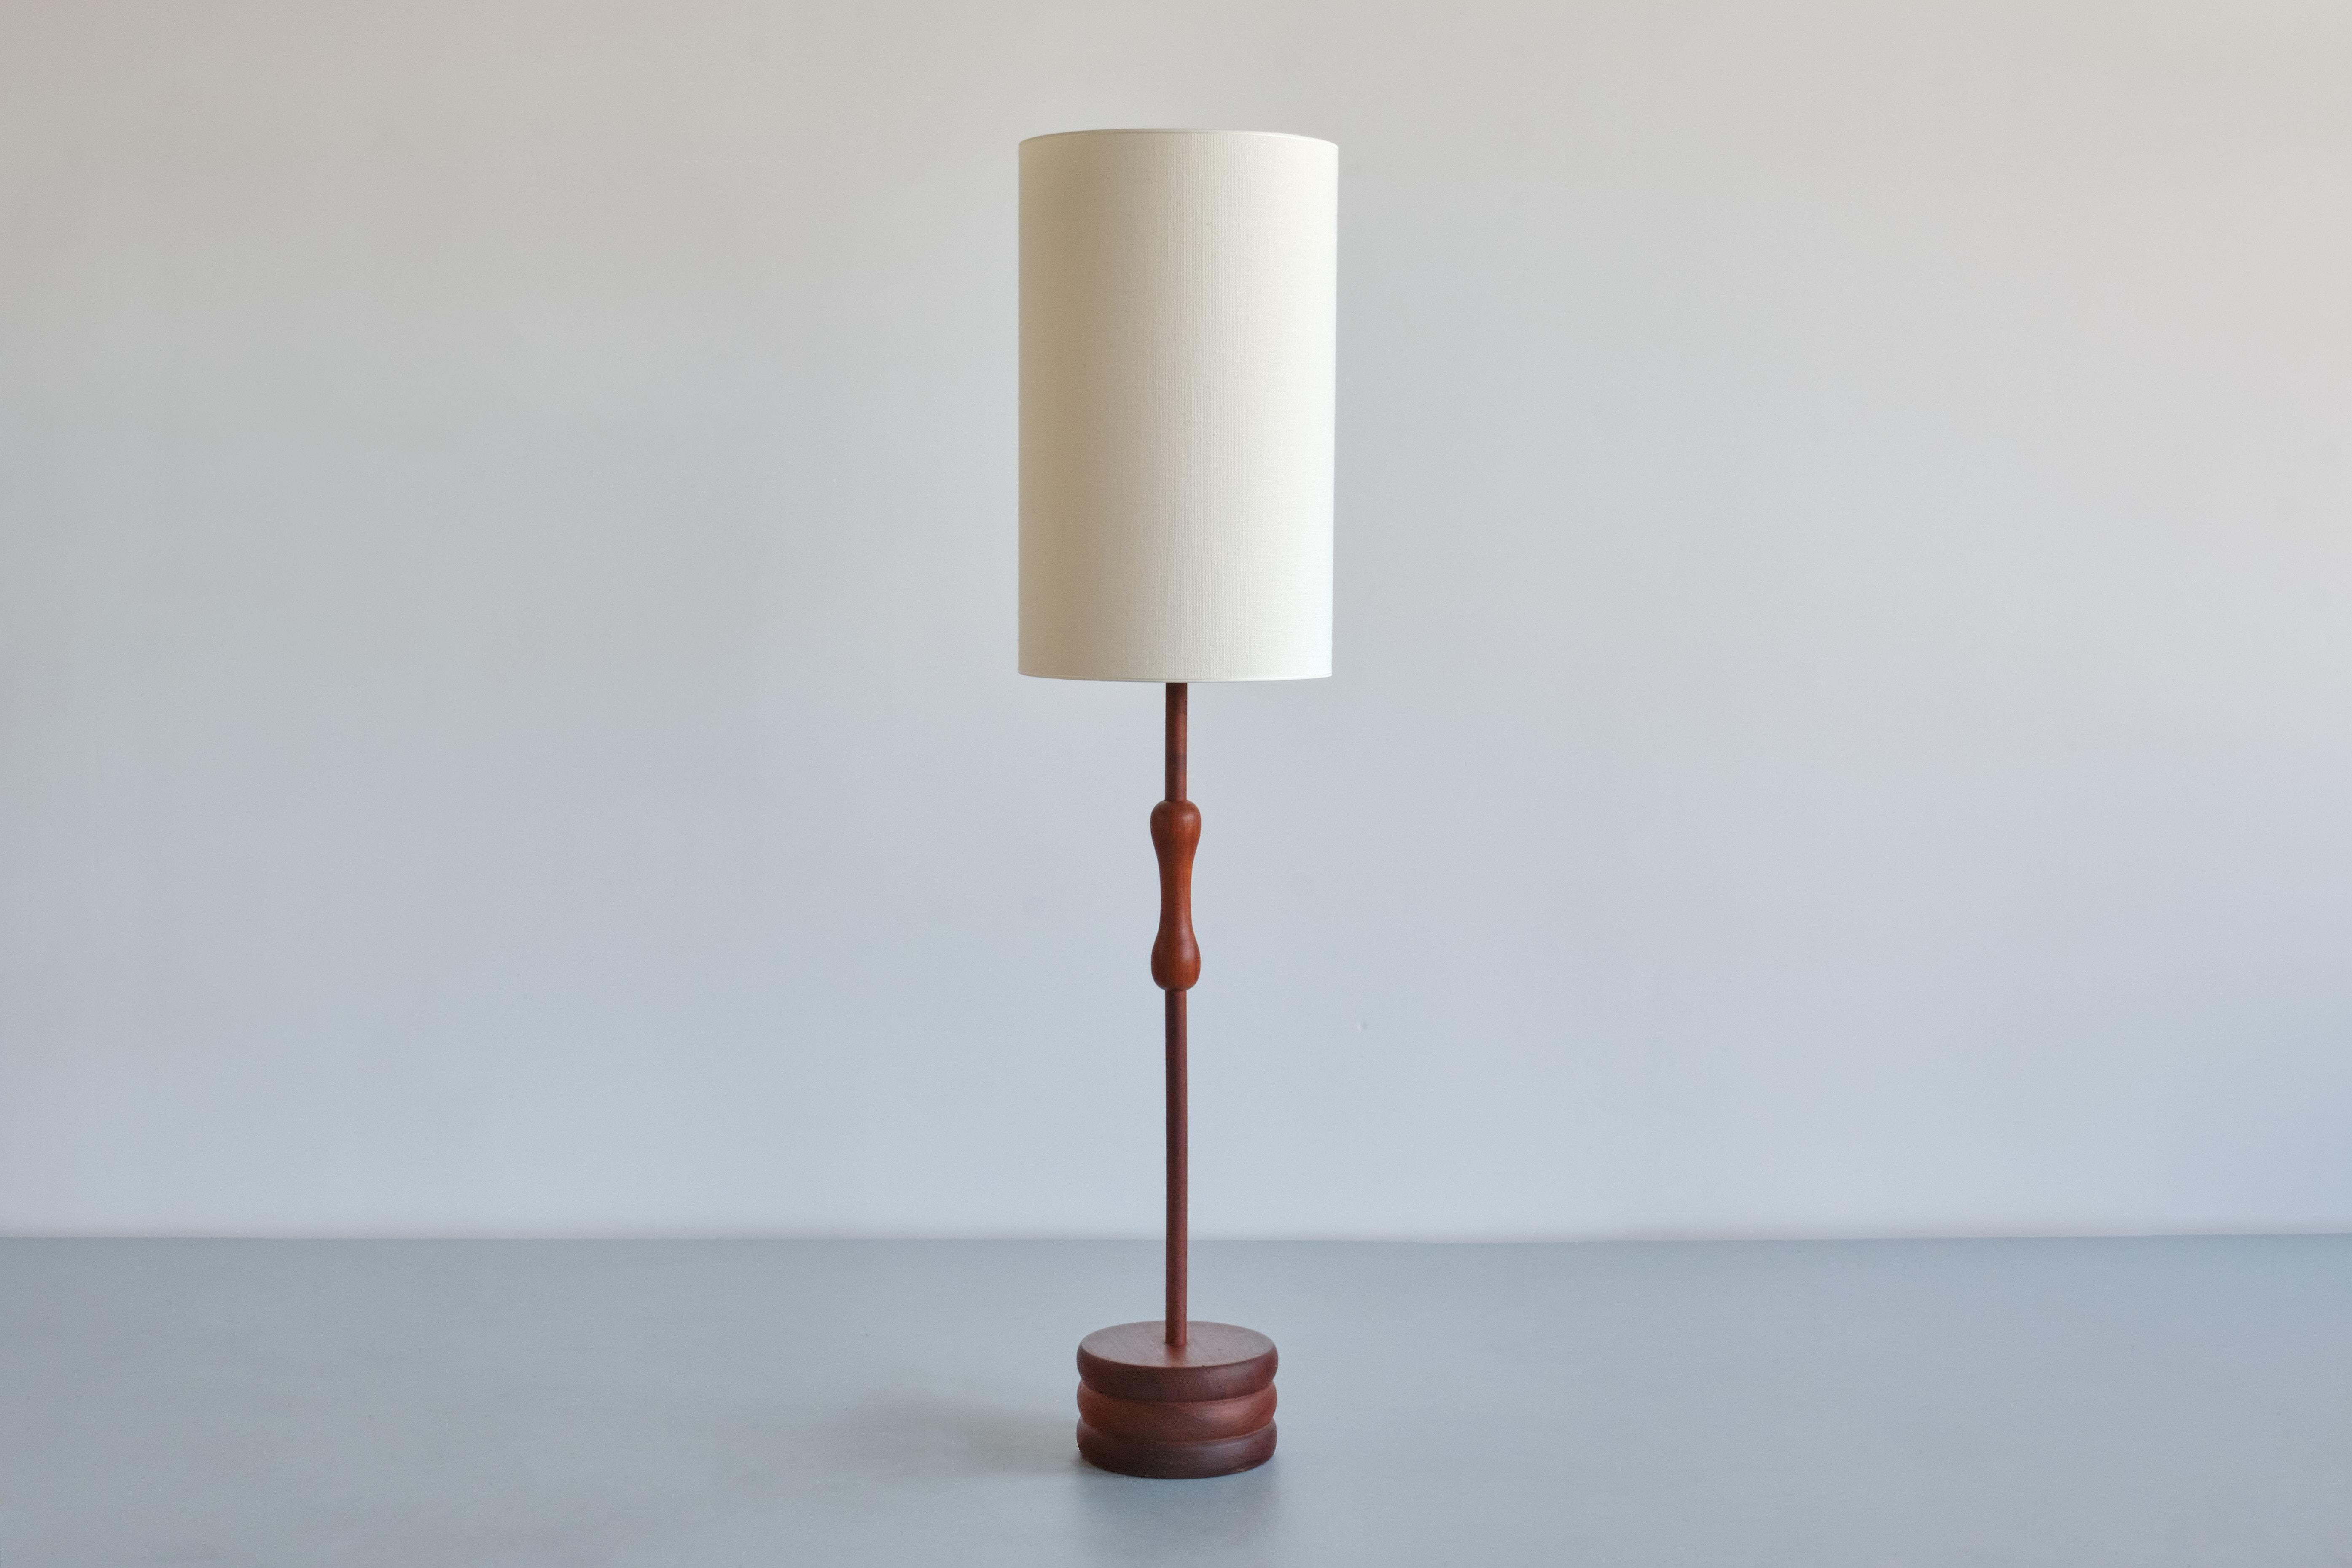 This striking floor lamp was produced in Sweden in the late 1950s.
The design consists of a circular base in solid teak wood with three carved, disc shaped circles. The central stem is again in solid teak wood and has a 
rounded, organic handle